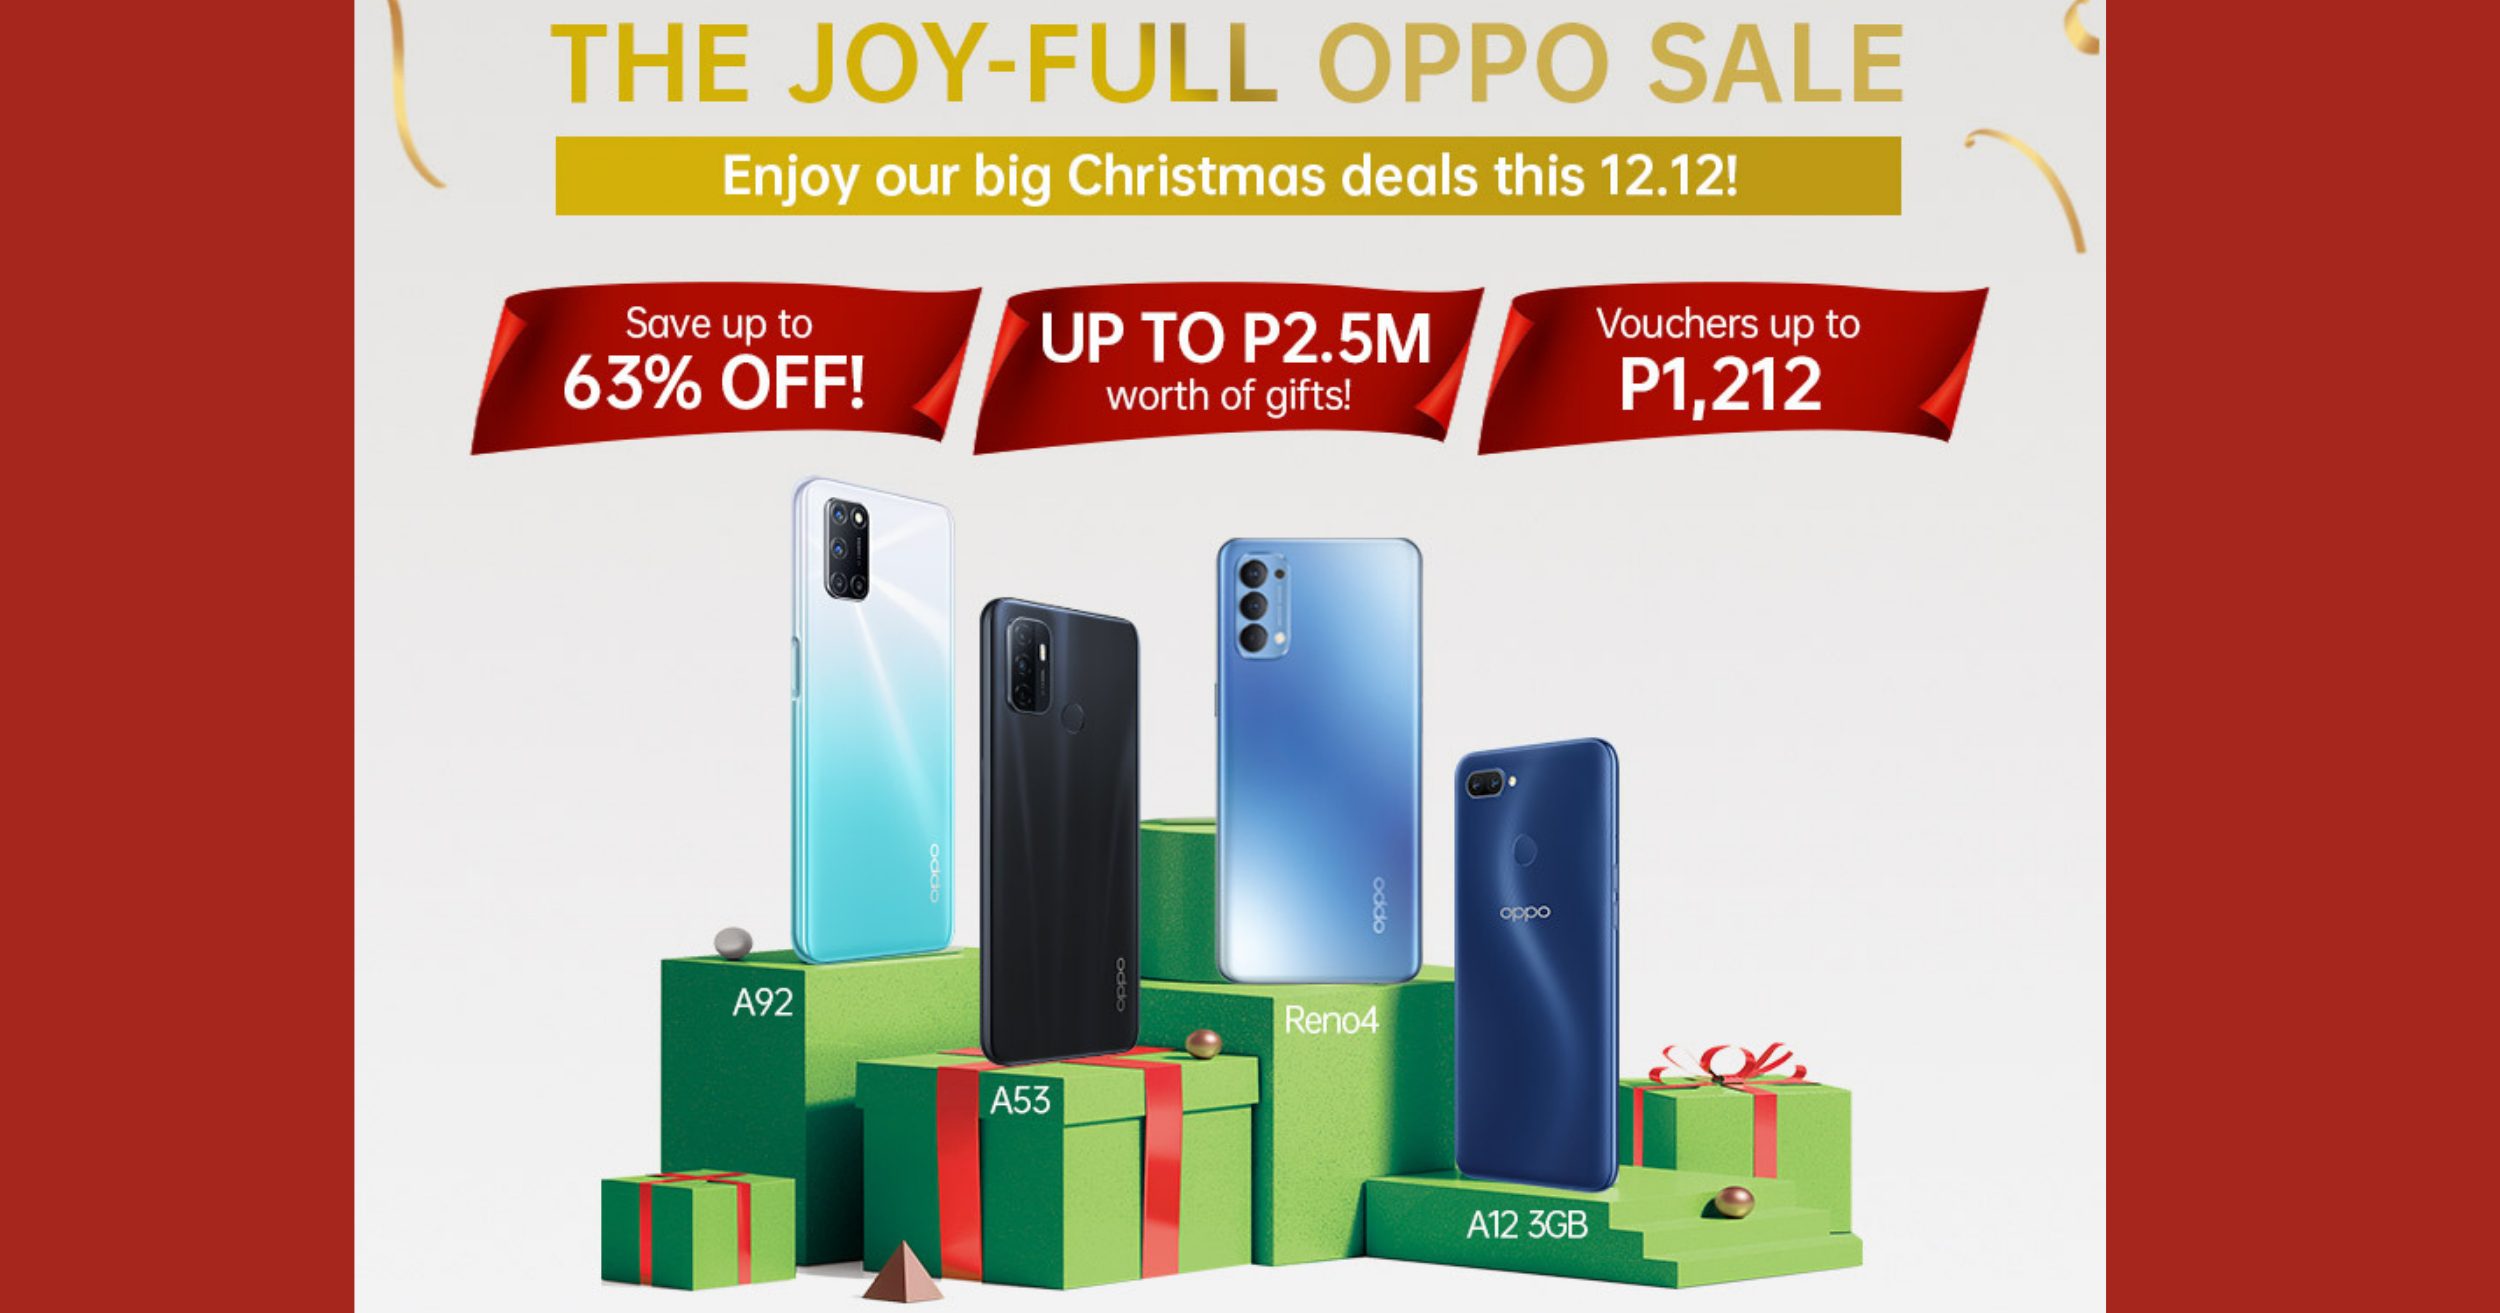 OPPO Joy-Full 12.12 Online Sale Discounts Products up to 63% Off